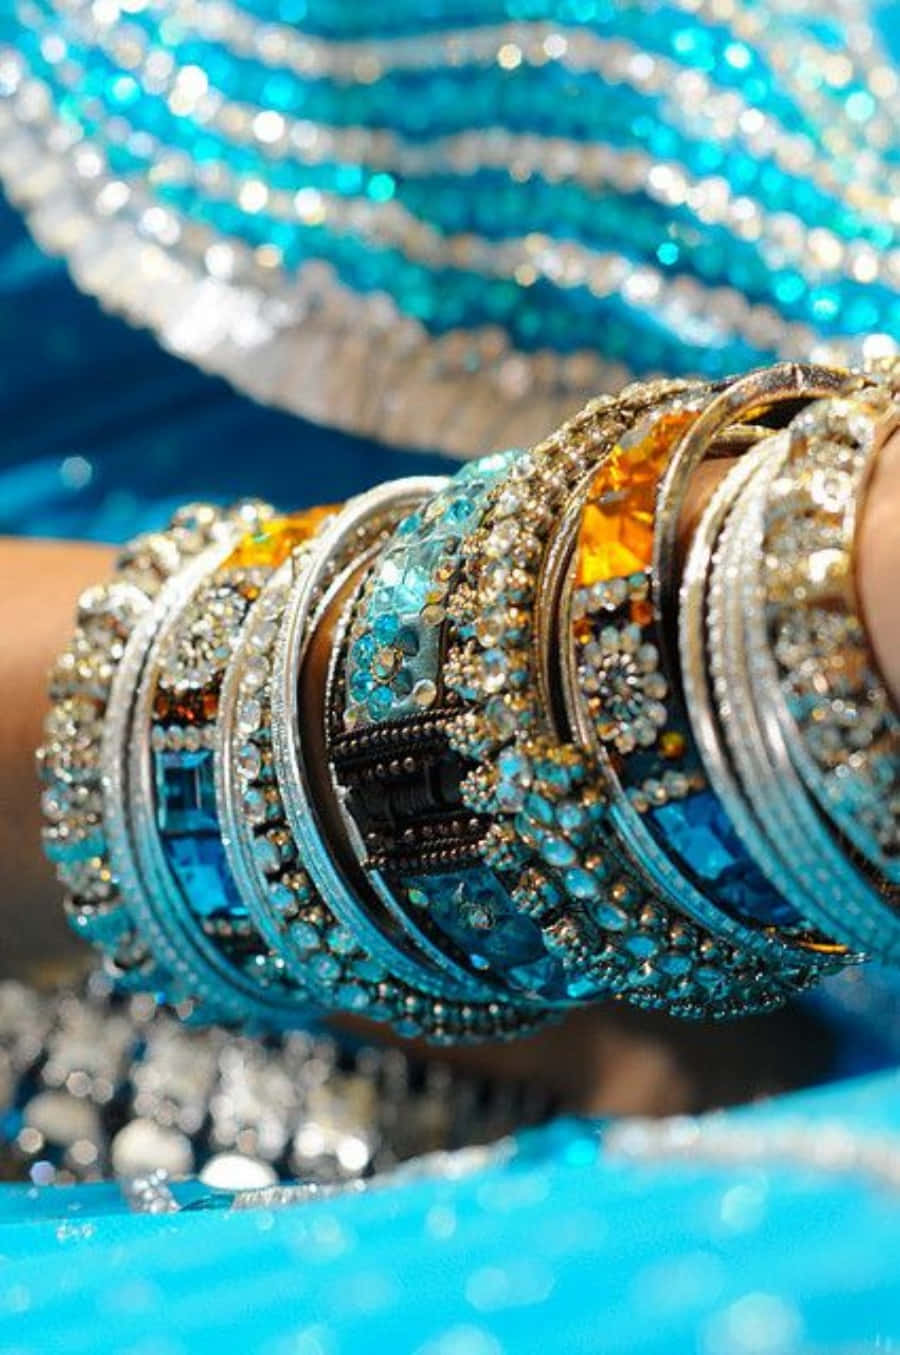 Colorful Bangle Bracelets Add Pizzazz to Any Outfit